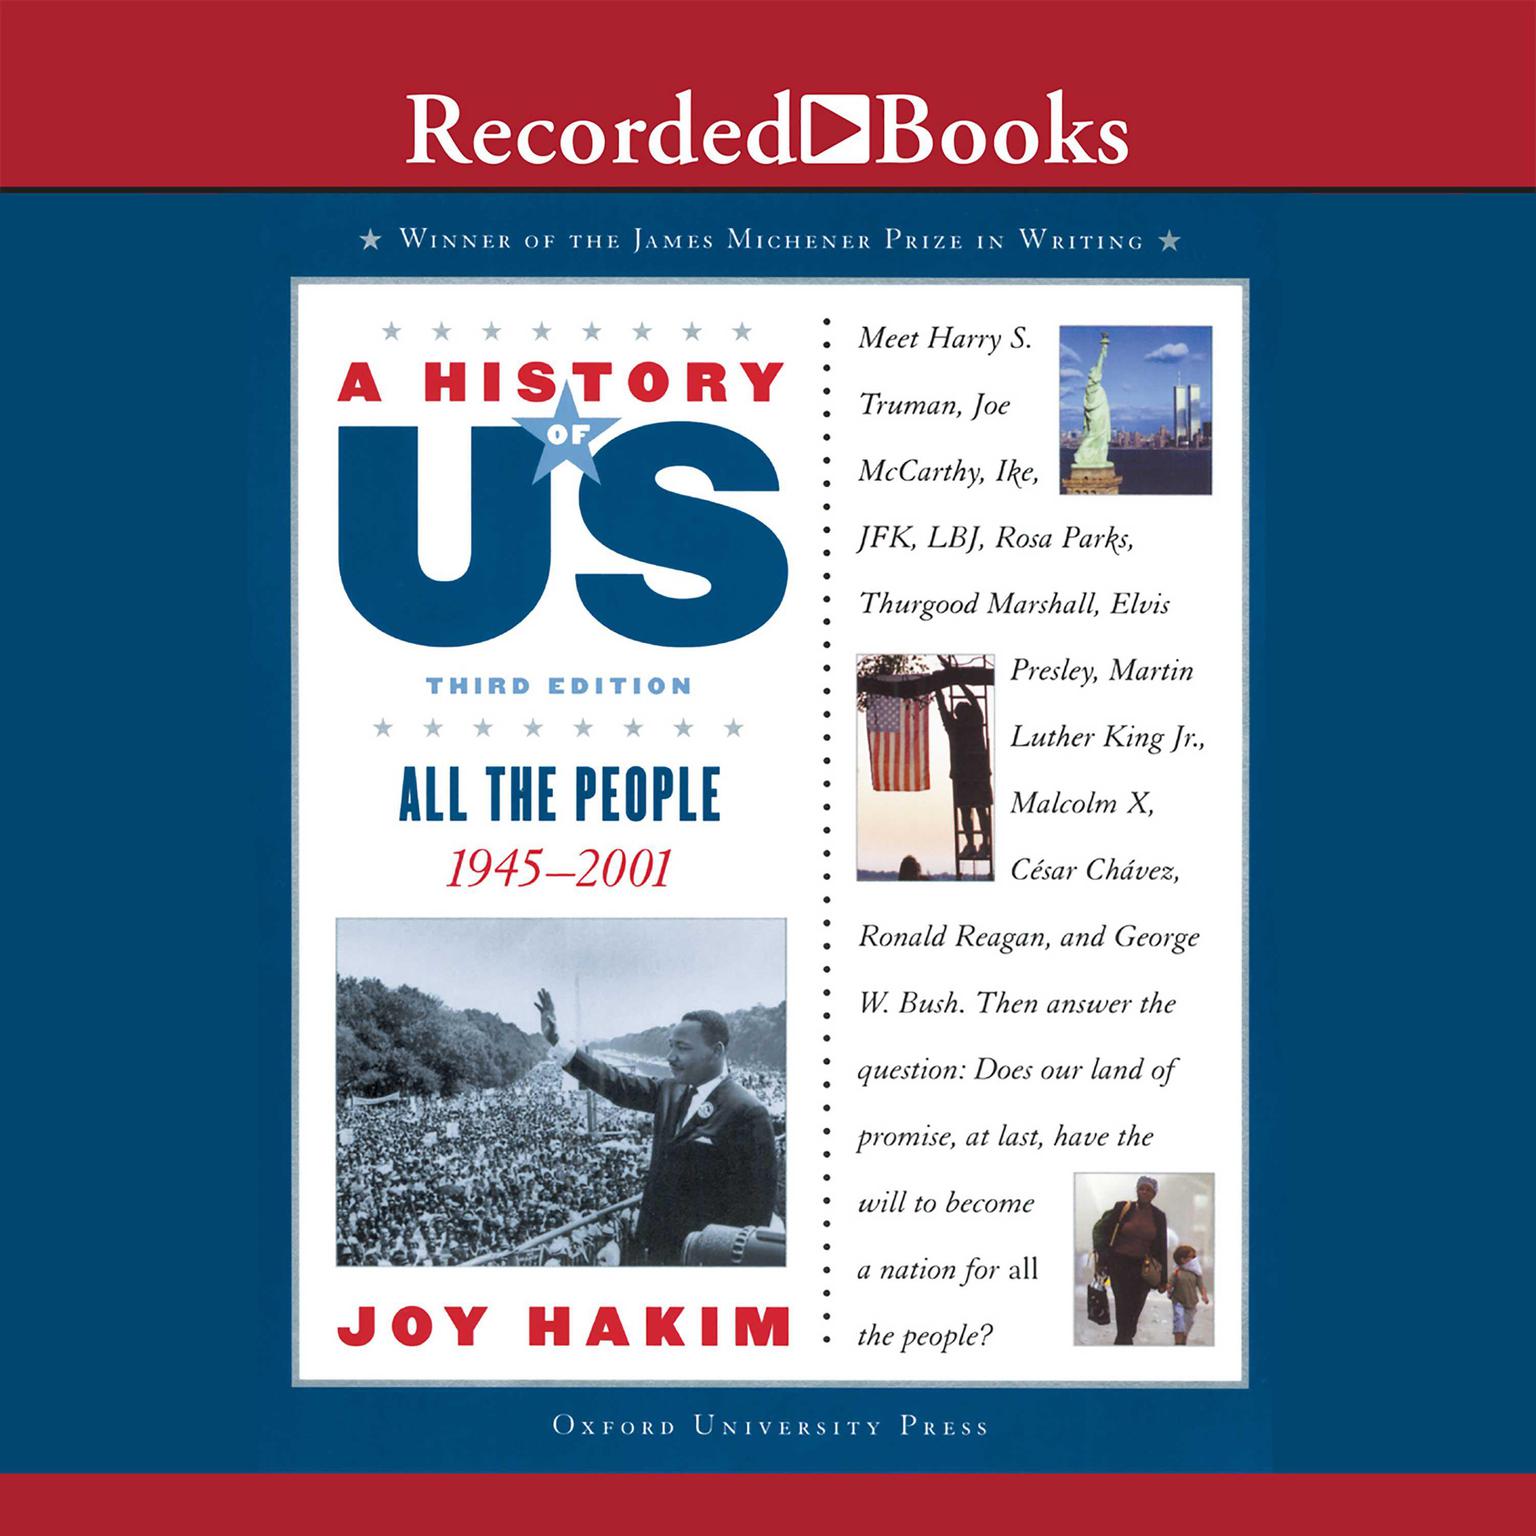 All the People: Book 10 (1945-2001) Audiobook, by Joy Hakim